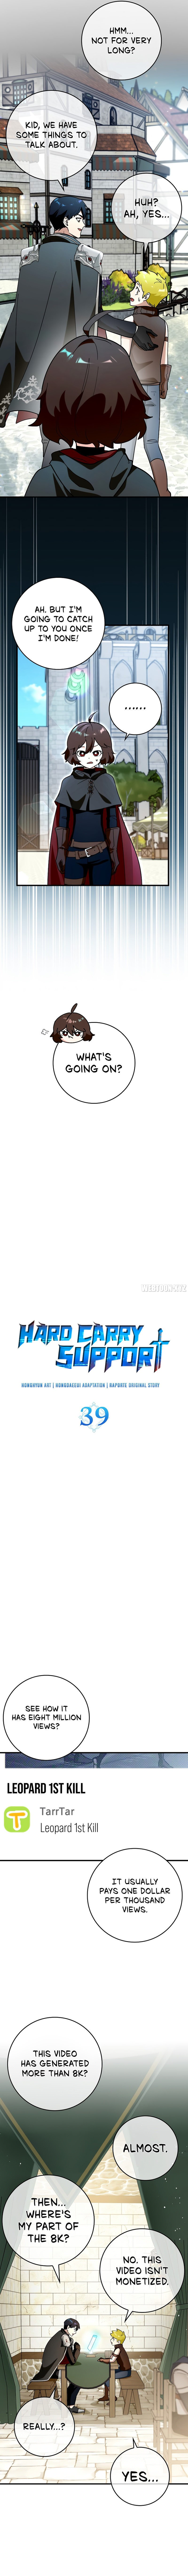 hard-carry-support-chap-39-2